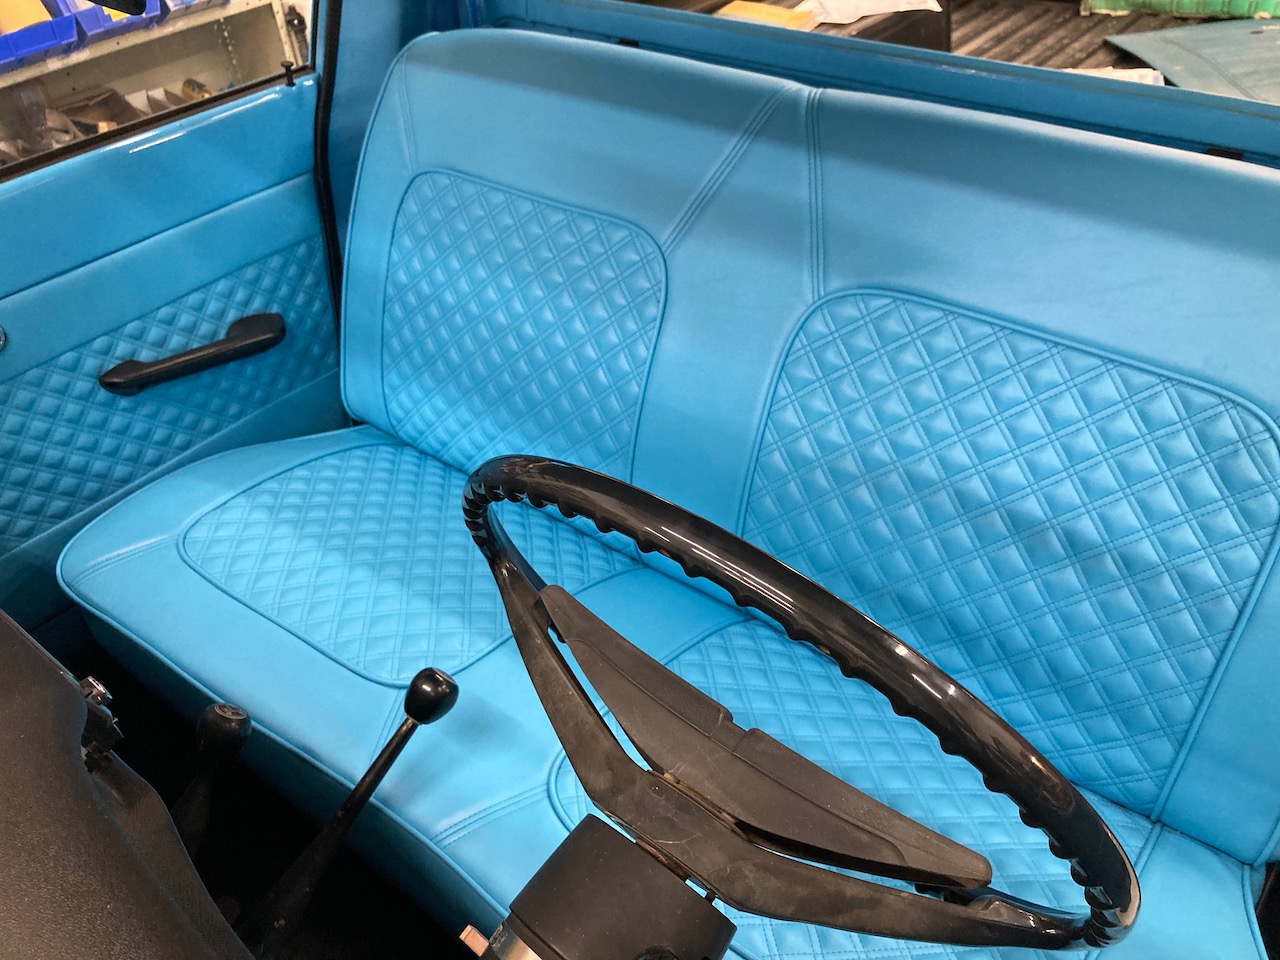 Enhanced experience in Automotive Upholstery